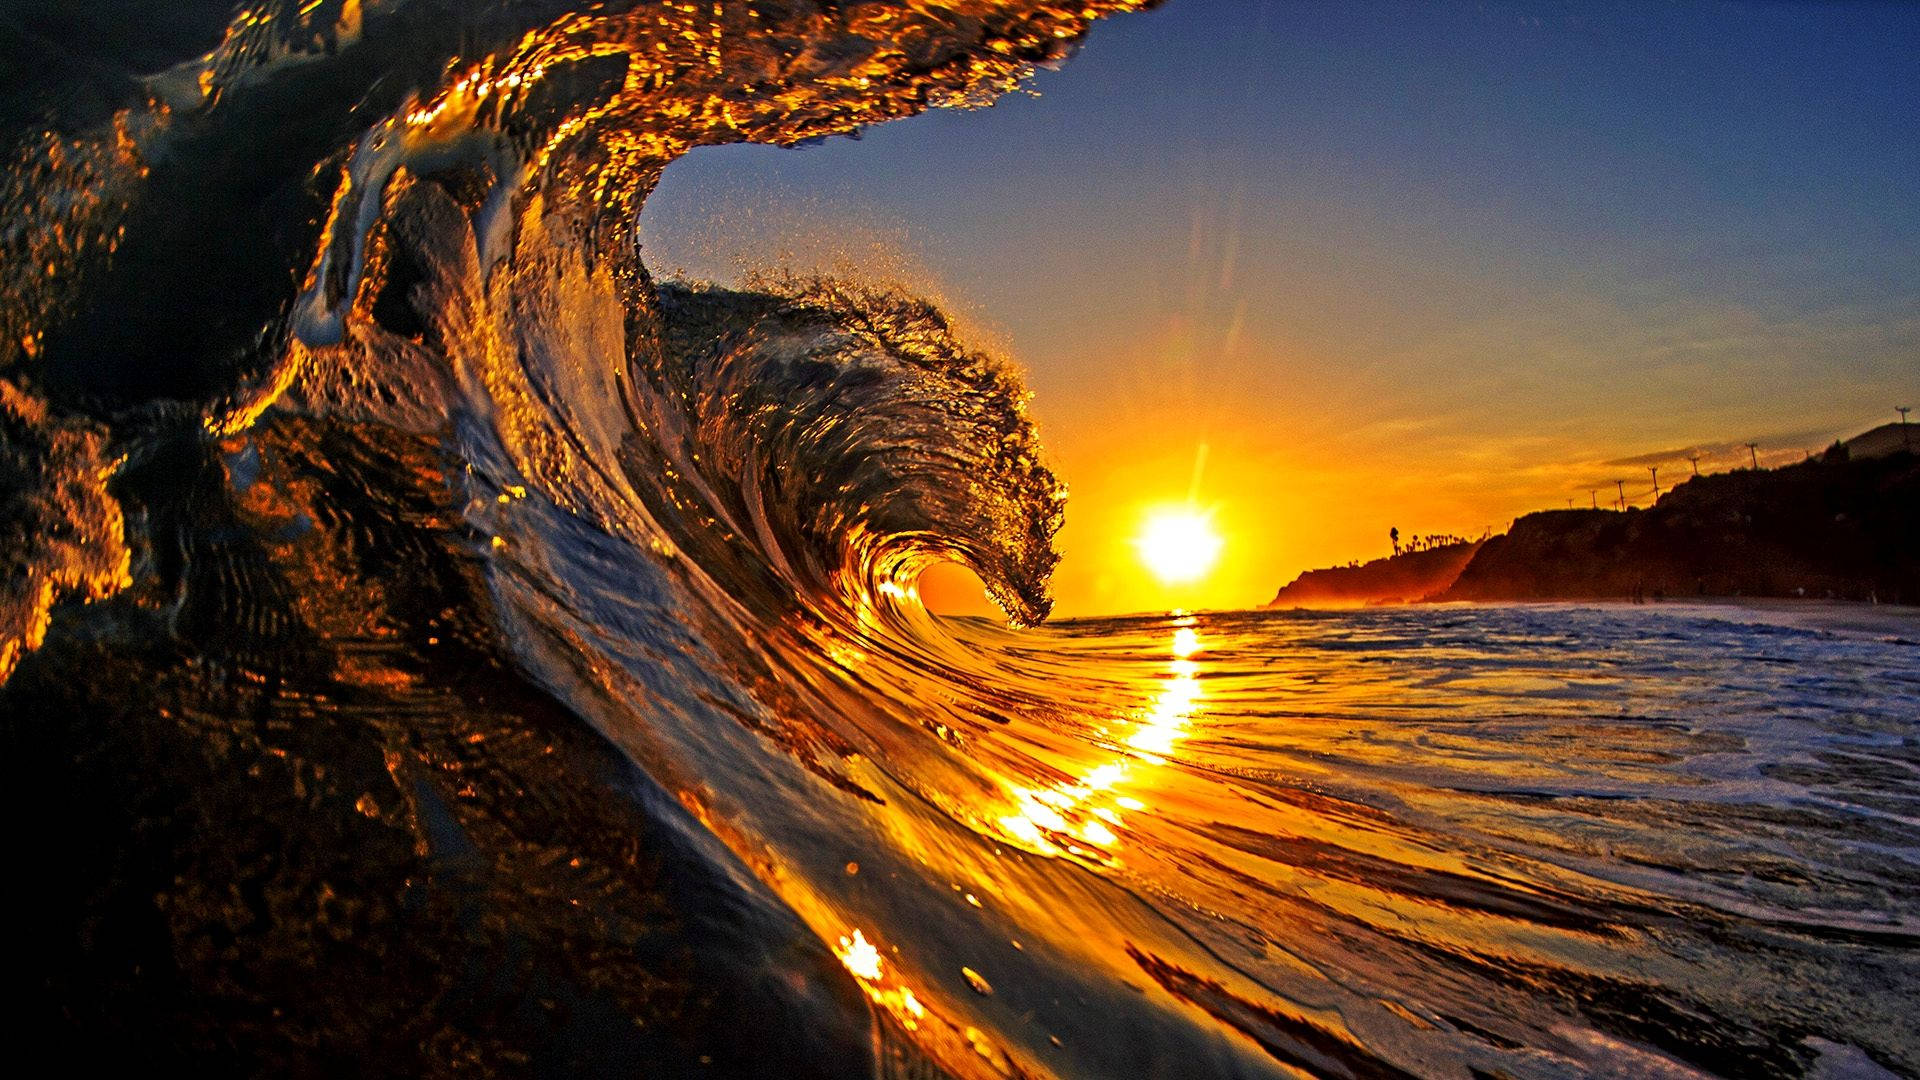 Download Beautiful Sunset And Waves Wallpaper 